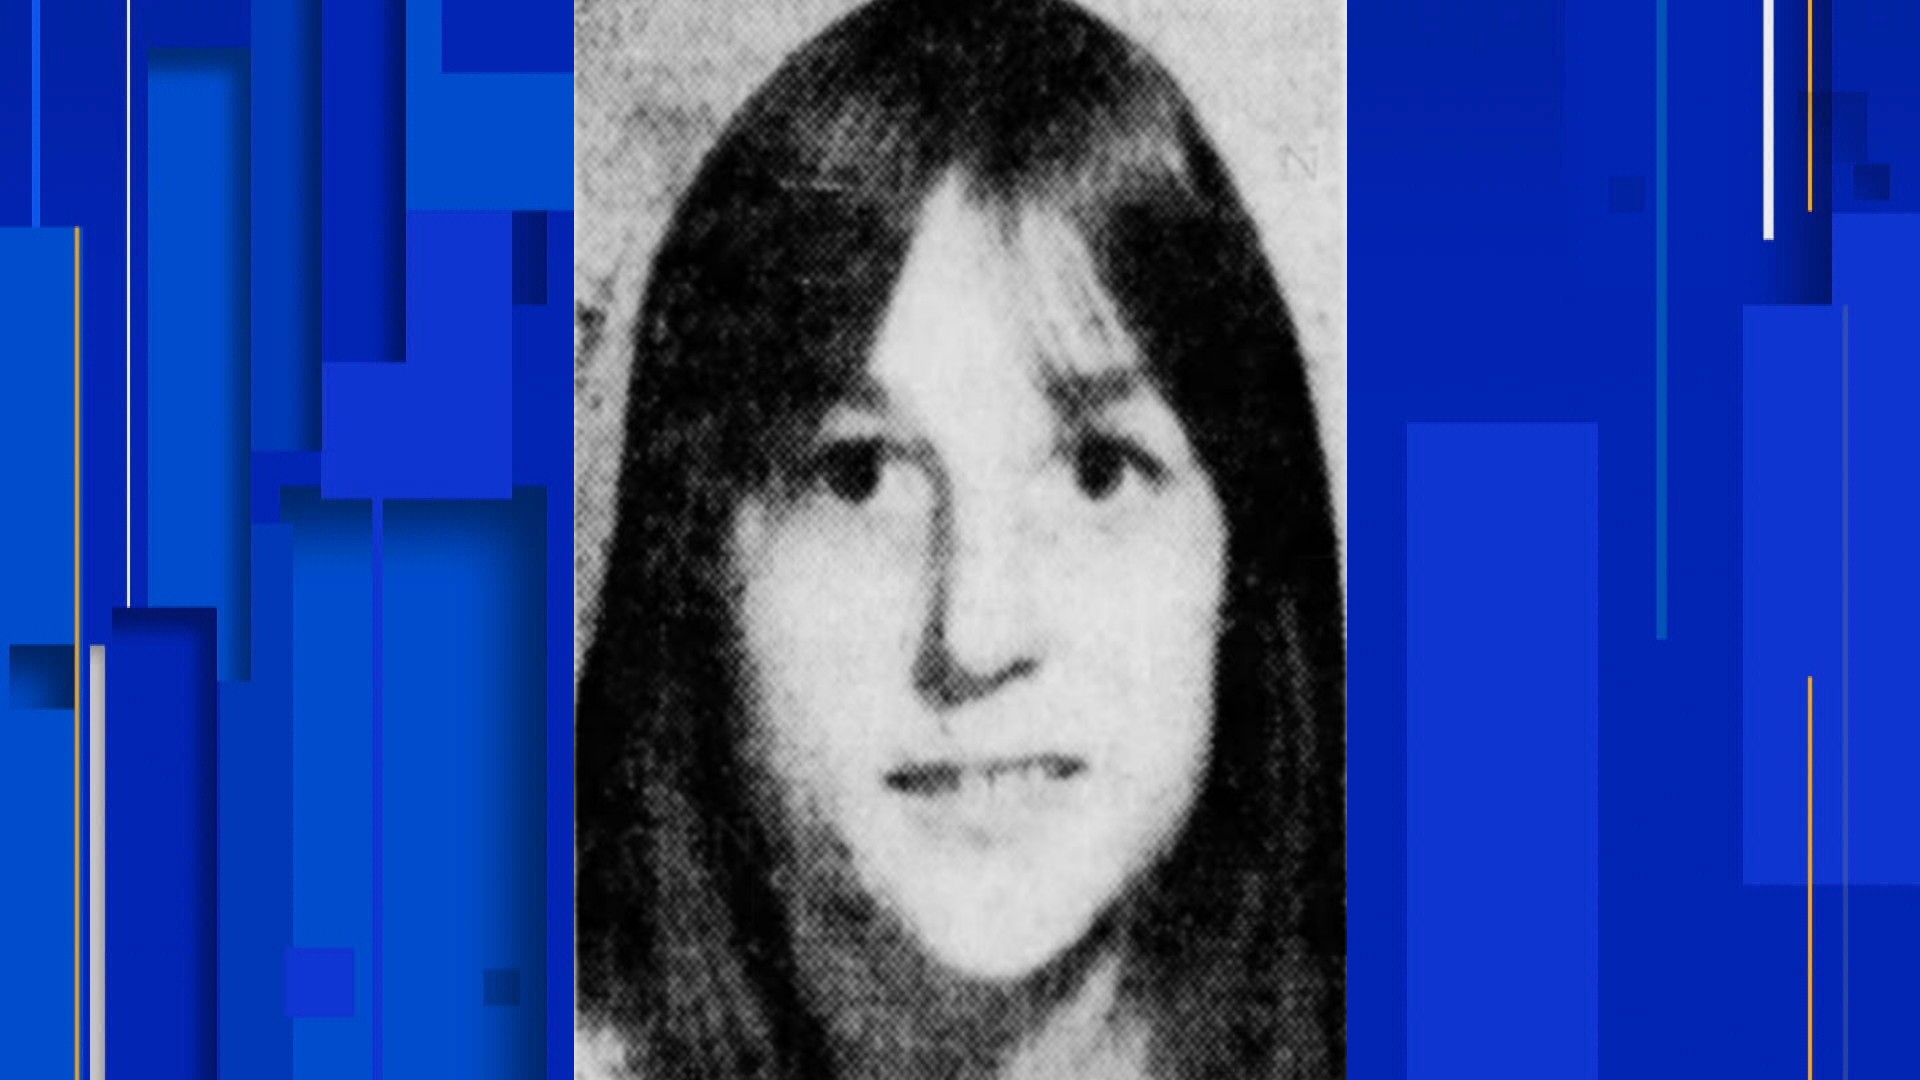 The Oakland County Child Killer -- Case Background pic pic